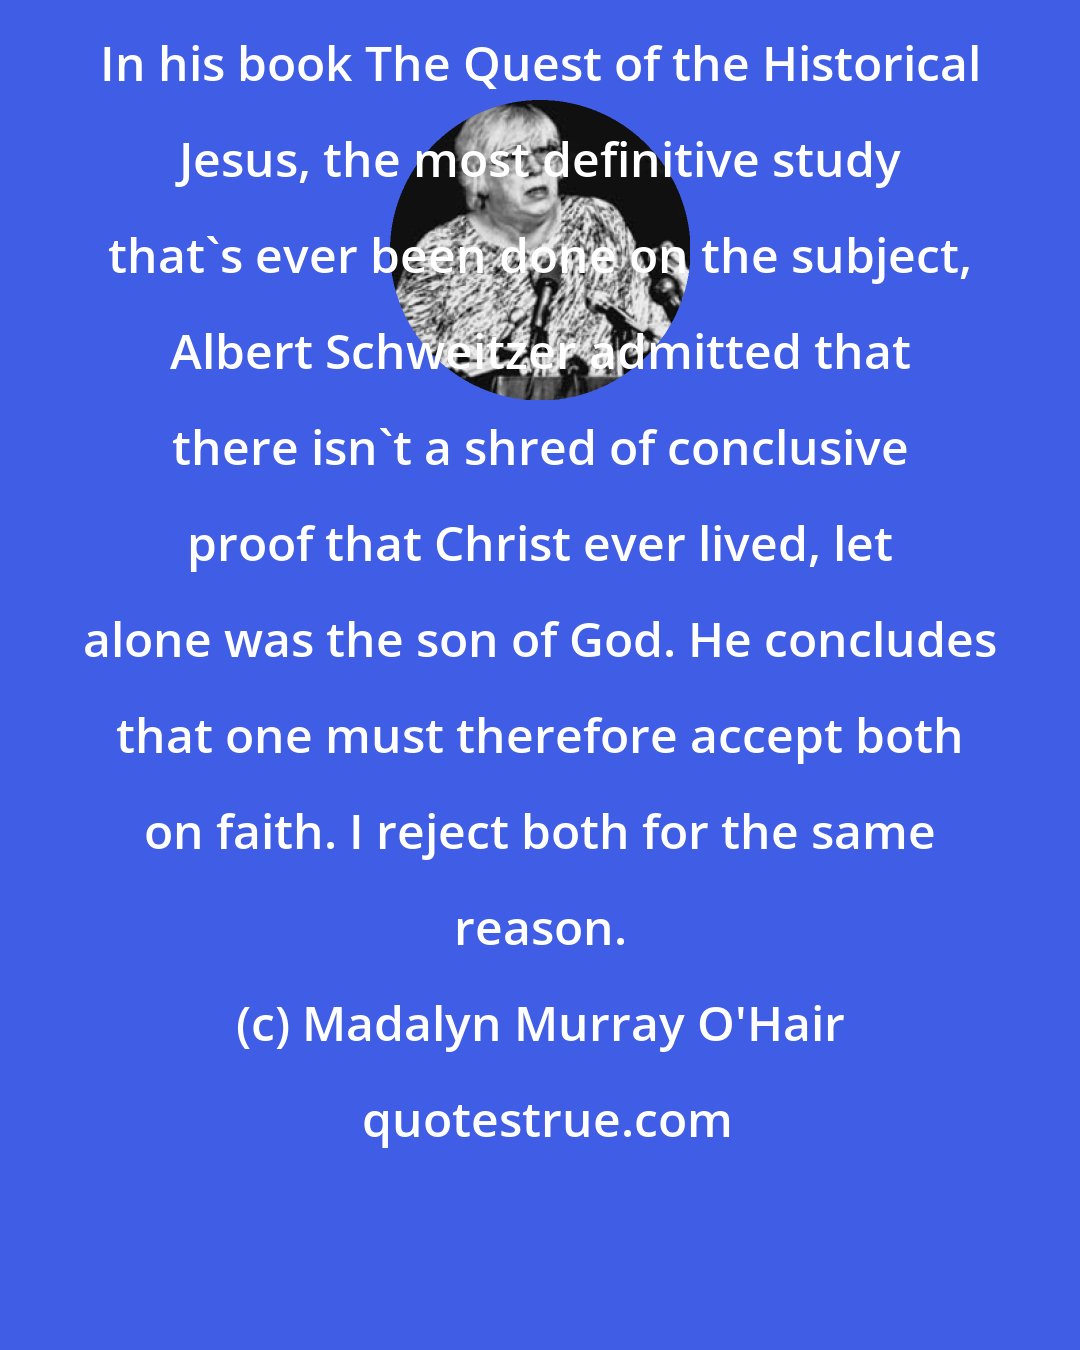 Madalyn Murray O'Hair: In his book The Quest of the Historical Jesus, the most definitive study that's ever been done on the subject, Albert Schweitzer admitted that there isn't a shred of conclusive proof that Christ ever lived, let alone was the son of God. He concludes that one must therefore accept both on faith. I reject both for the same reason.